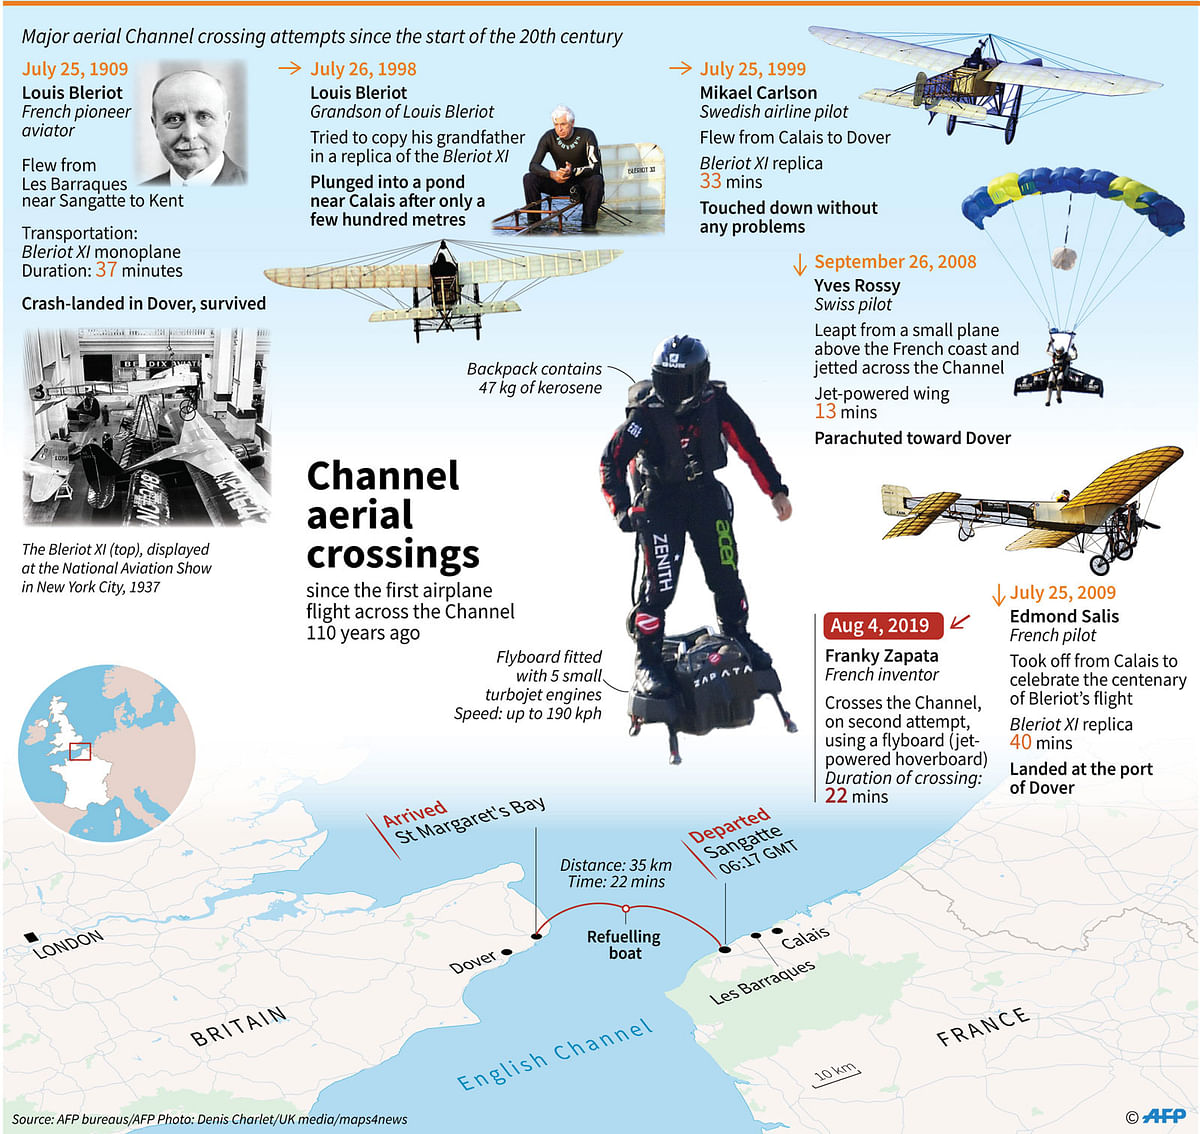 Graphic showing main aerial crossings since the start of the 20th century, including the successful crossing Sunday, 4 August, by French inventor Franky Zapata on a `flyboard`. Photo: AFP